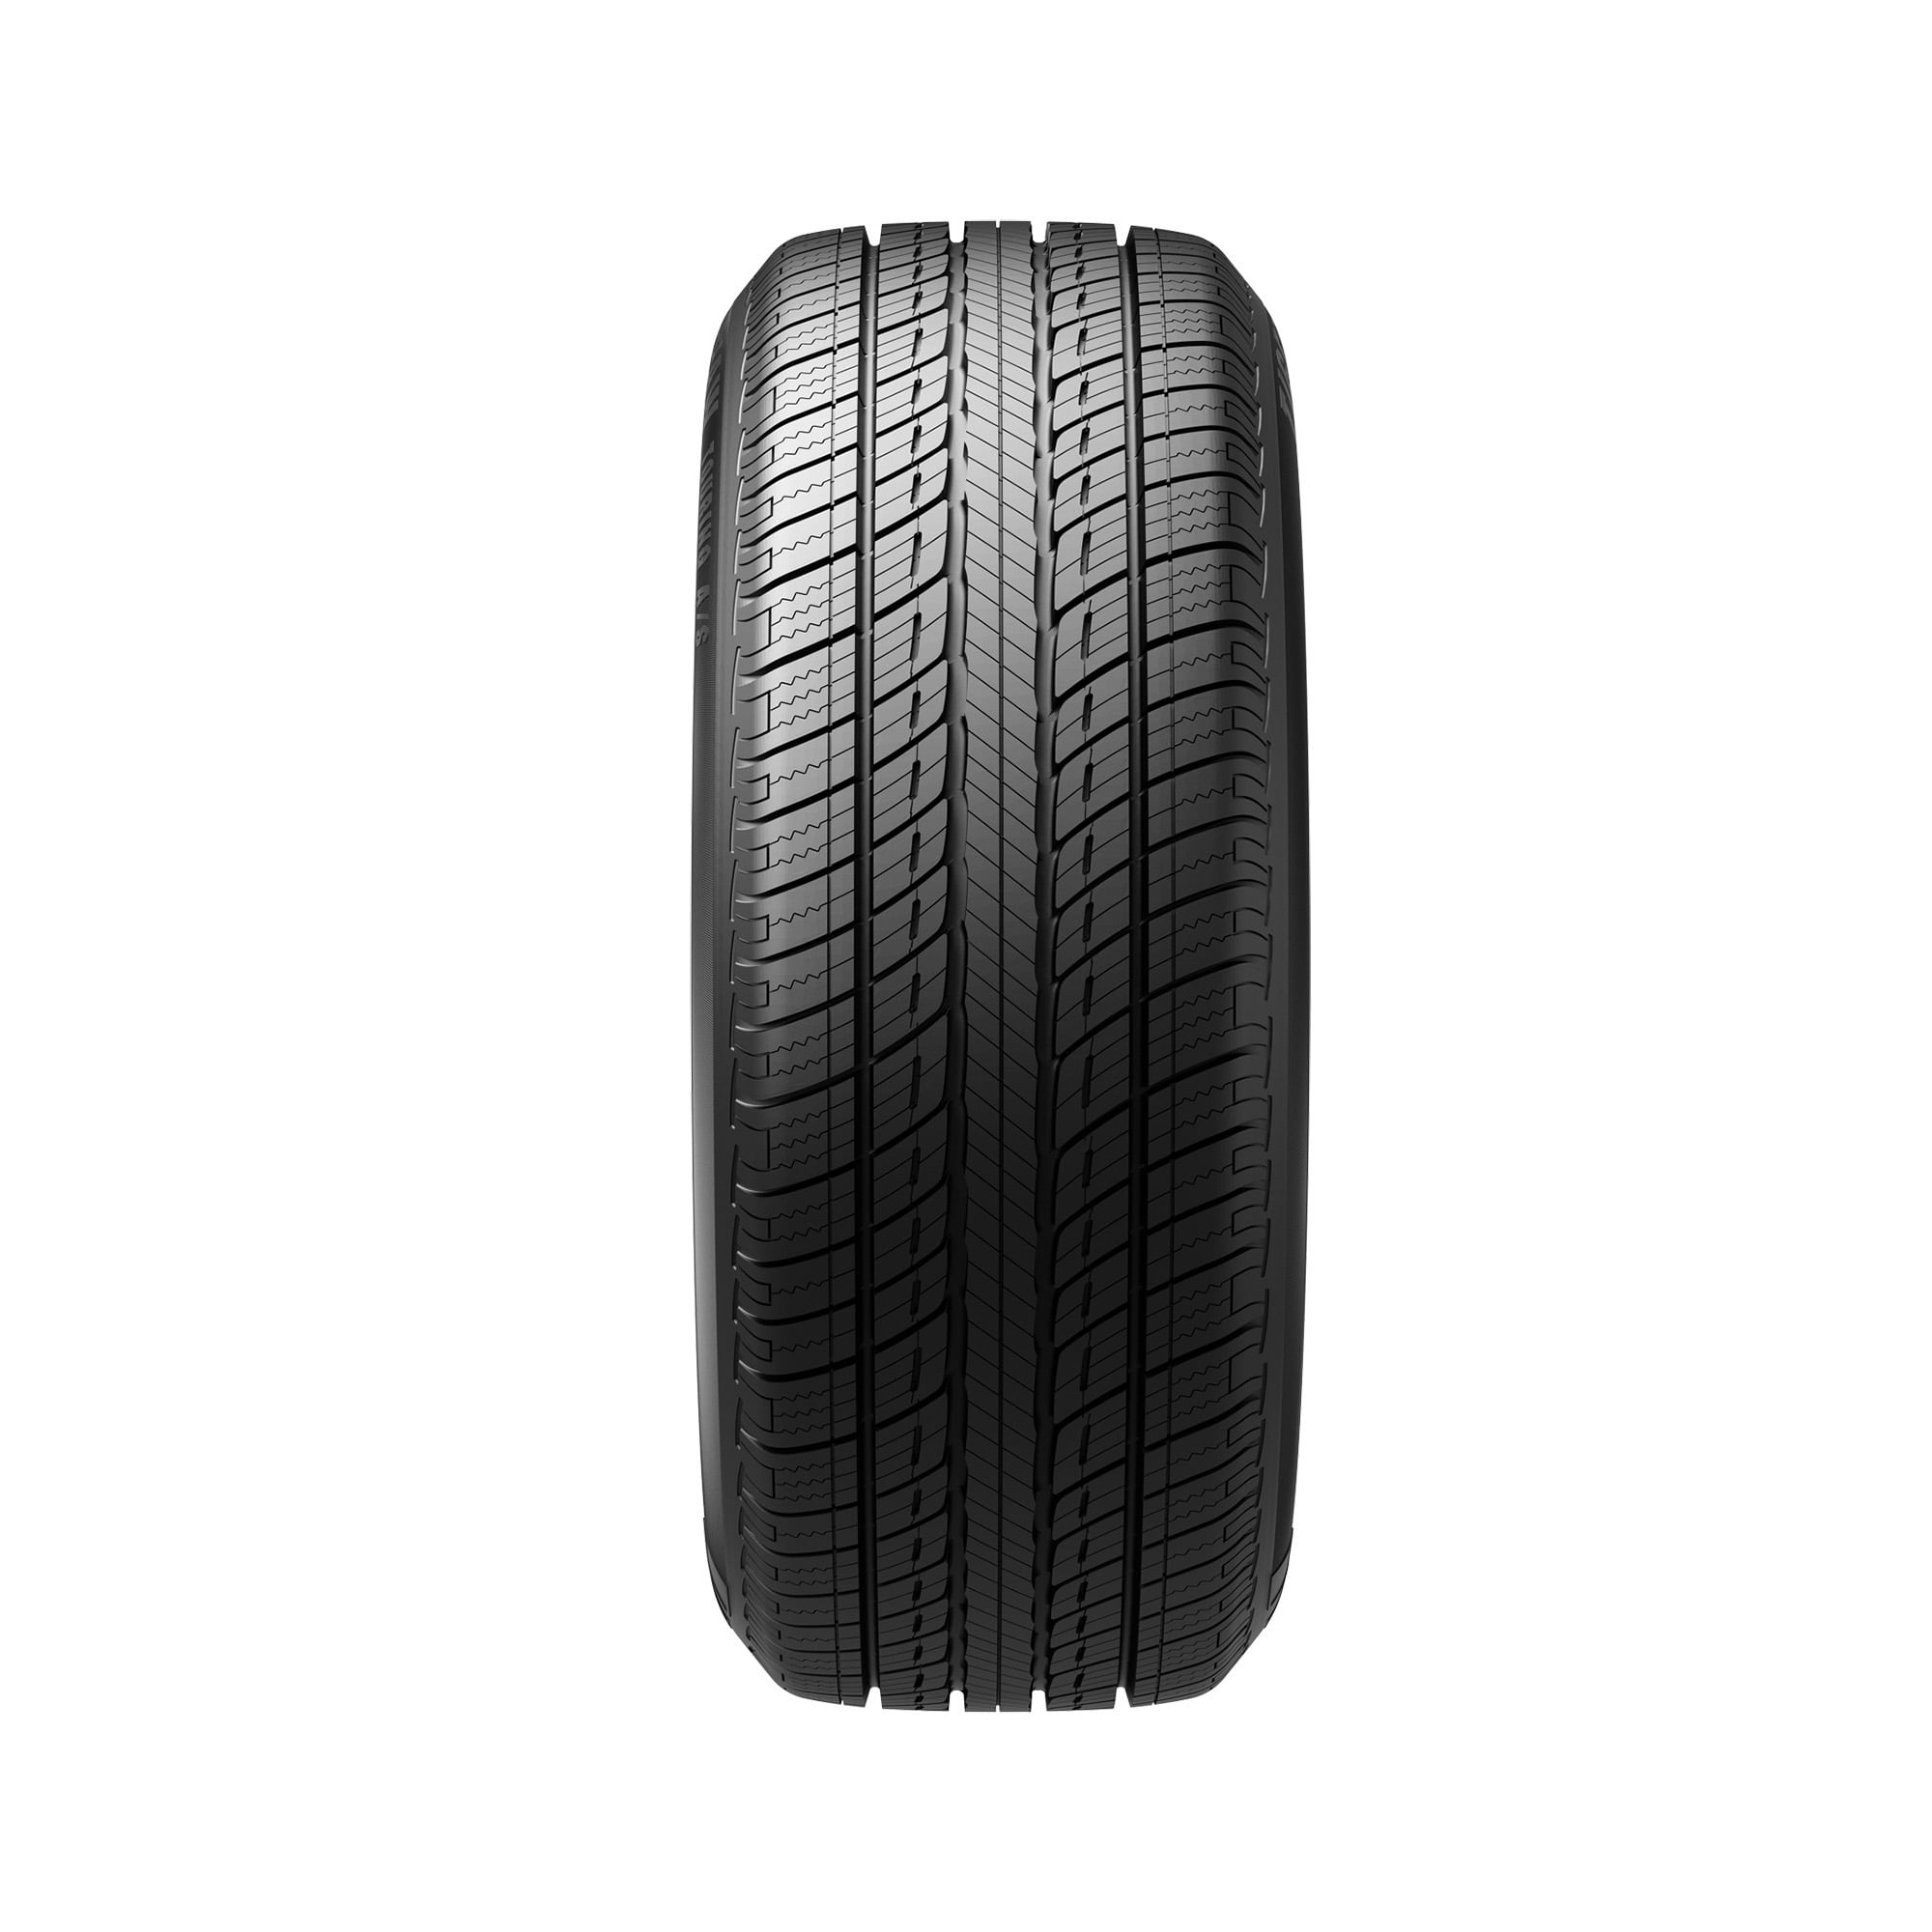 Uniroyal Tiger Paw Ice & Snow 3 Winter 215/60R16 95T Passenger Tire Fits:  2013-20 Ford Fusion S, 2008-12 Honda Accord LX-P